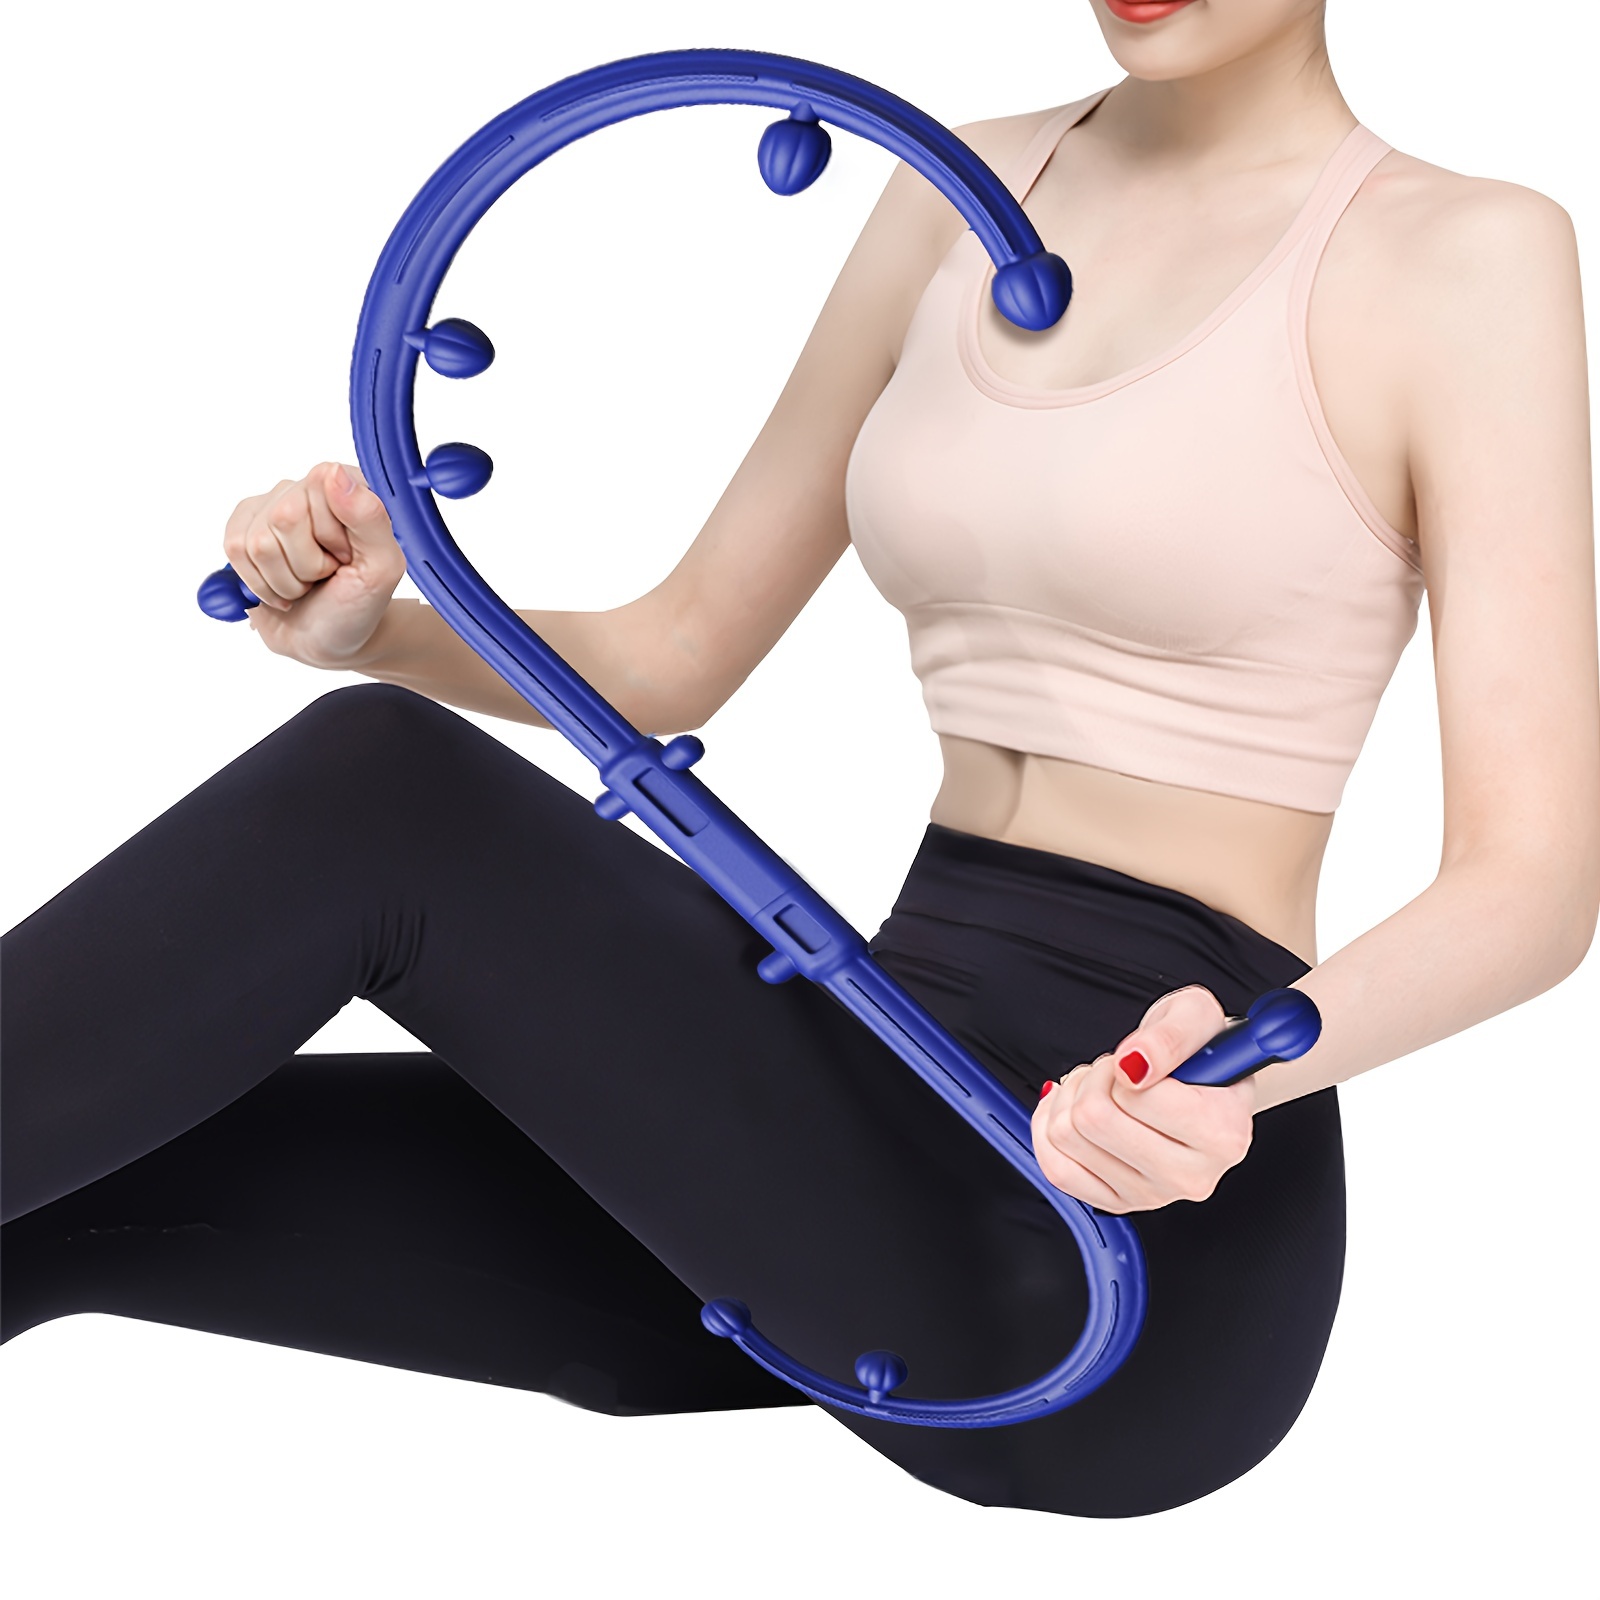 Body Back Buddy Classic – Trigger Point Massage Tool, Neck and Back  Massager Handheld, Manual Self Massager, Massage Cane, – Uncommon Physical  Therapy